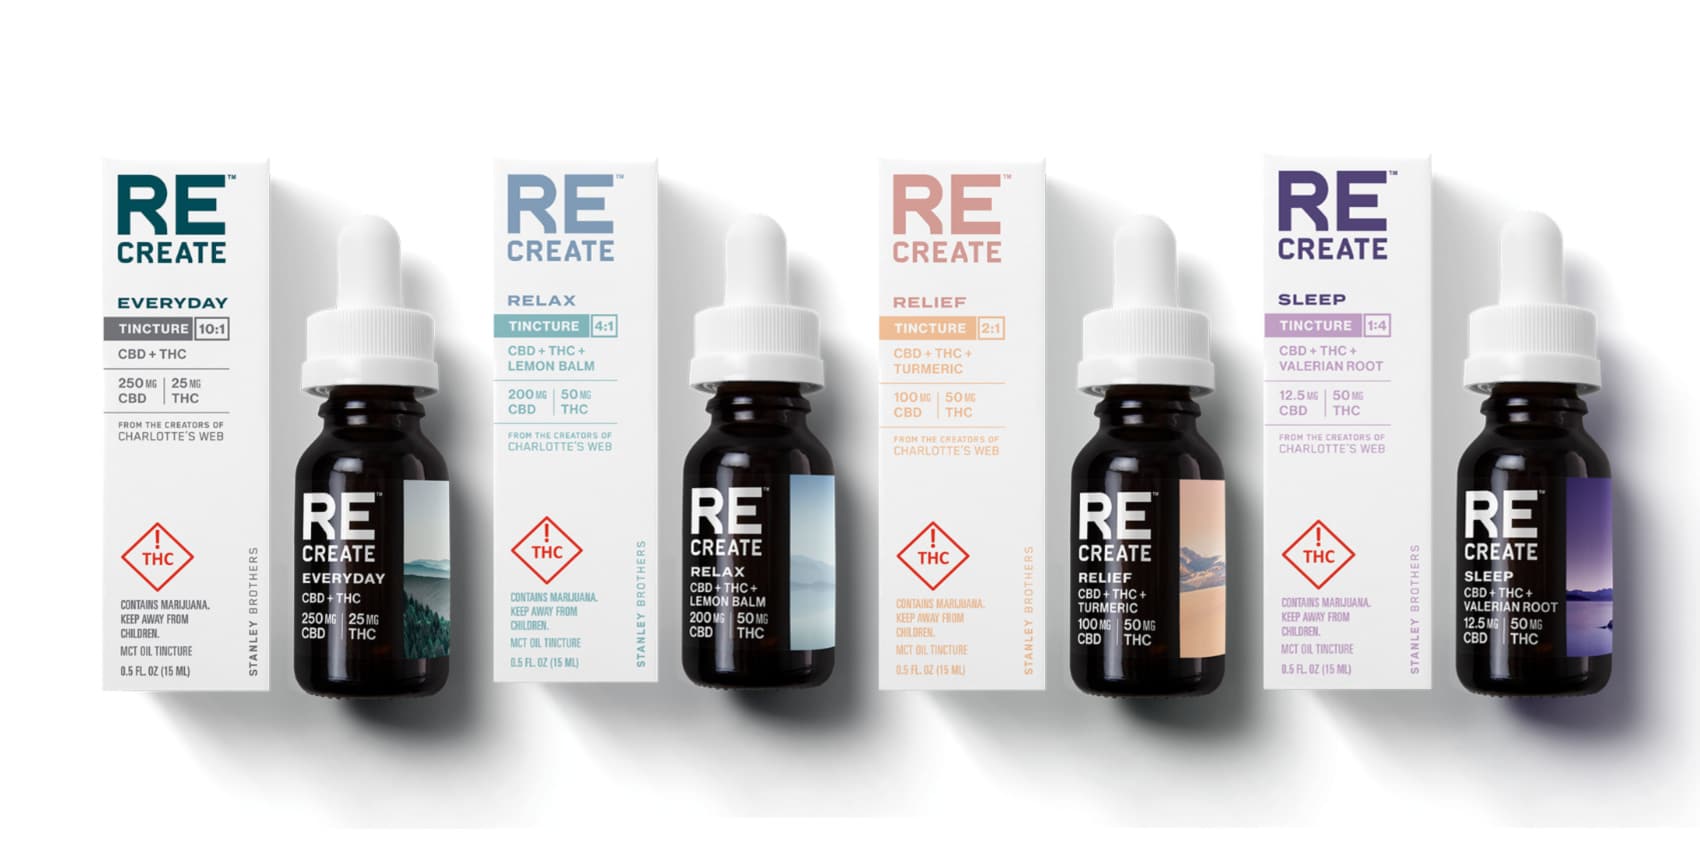 The four ReCreate tinctures included in the COVID Relief Program, showing the tincture bottles and packaging.